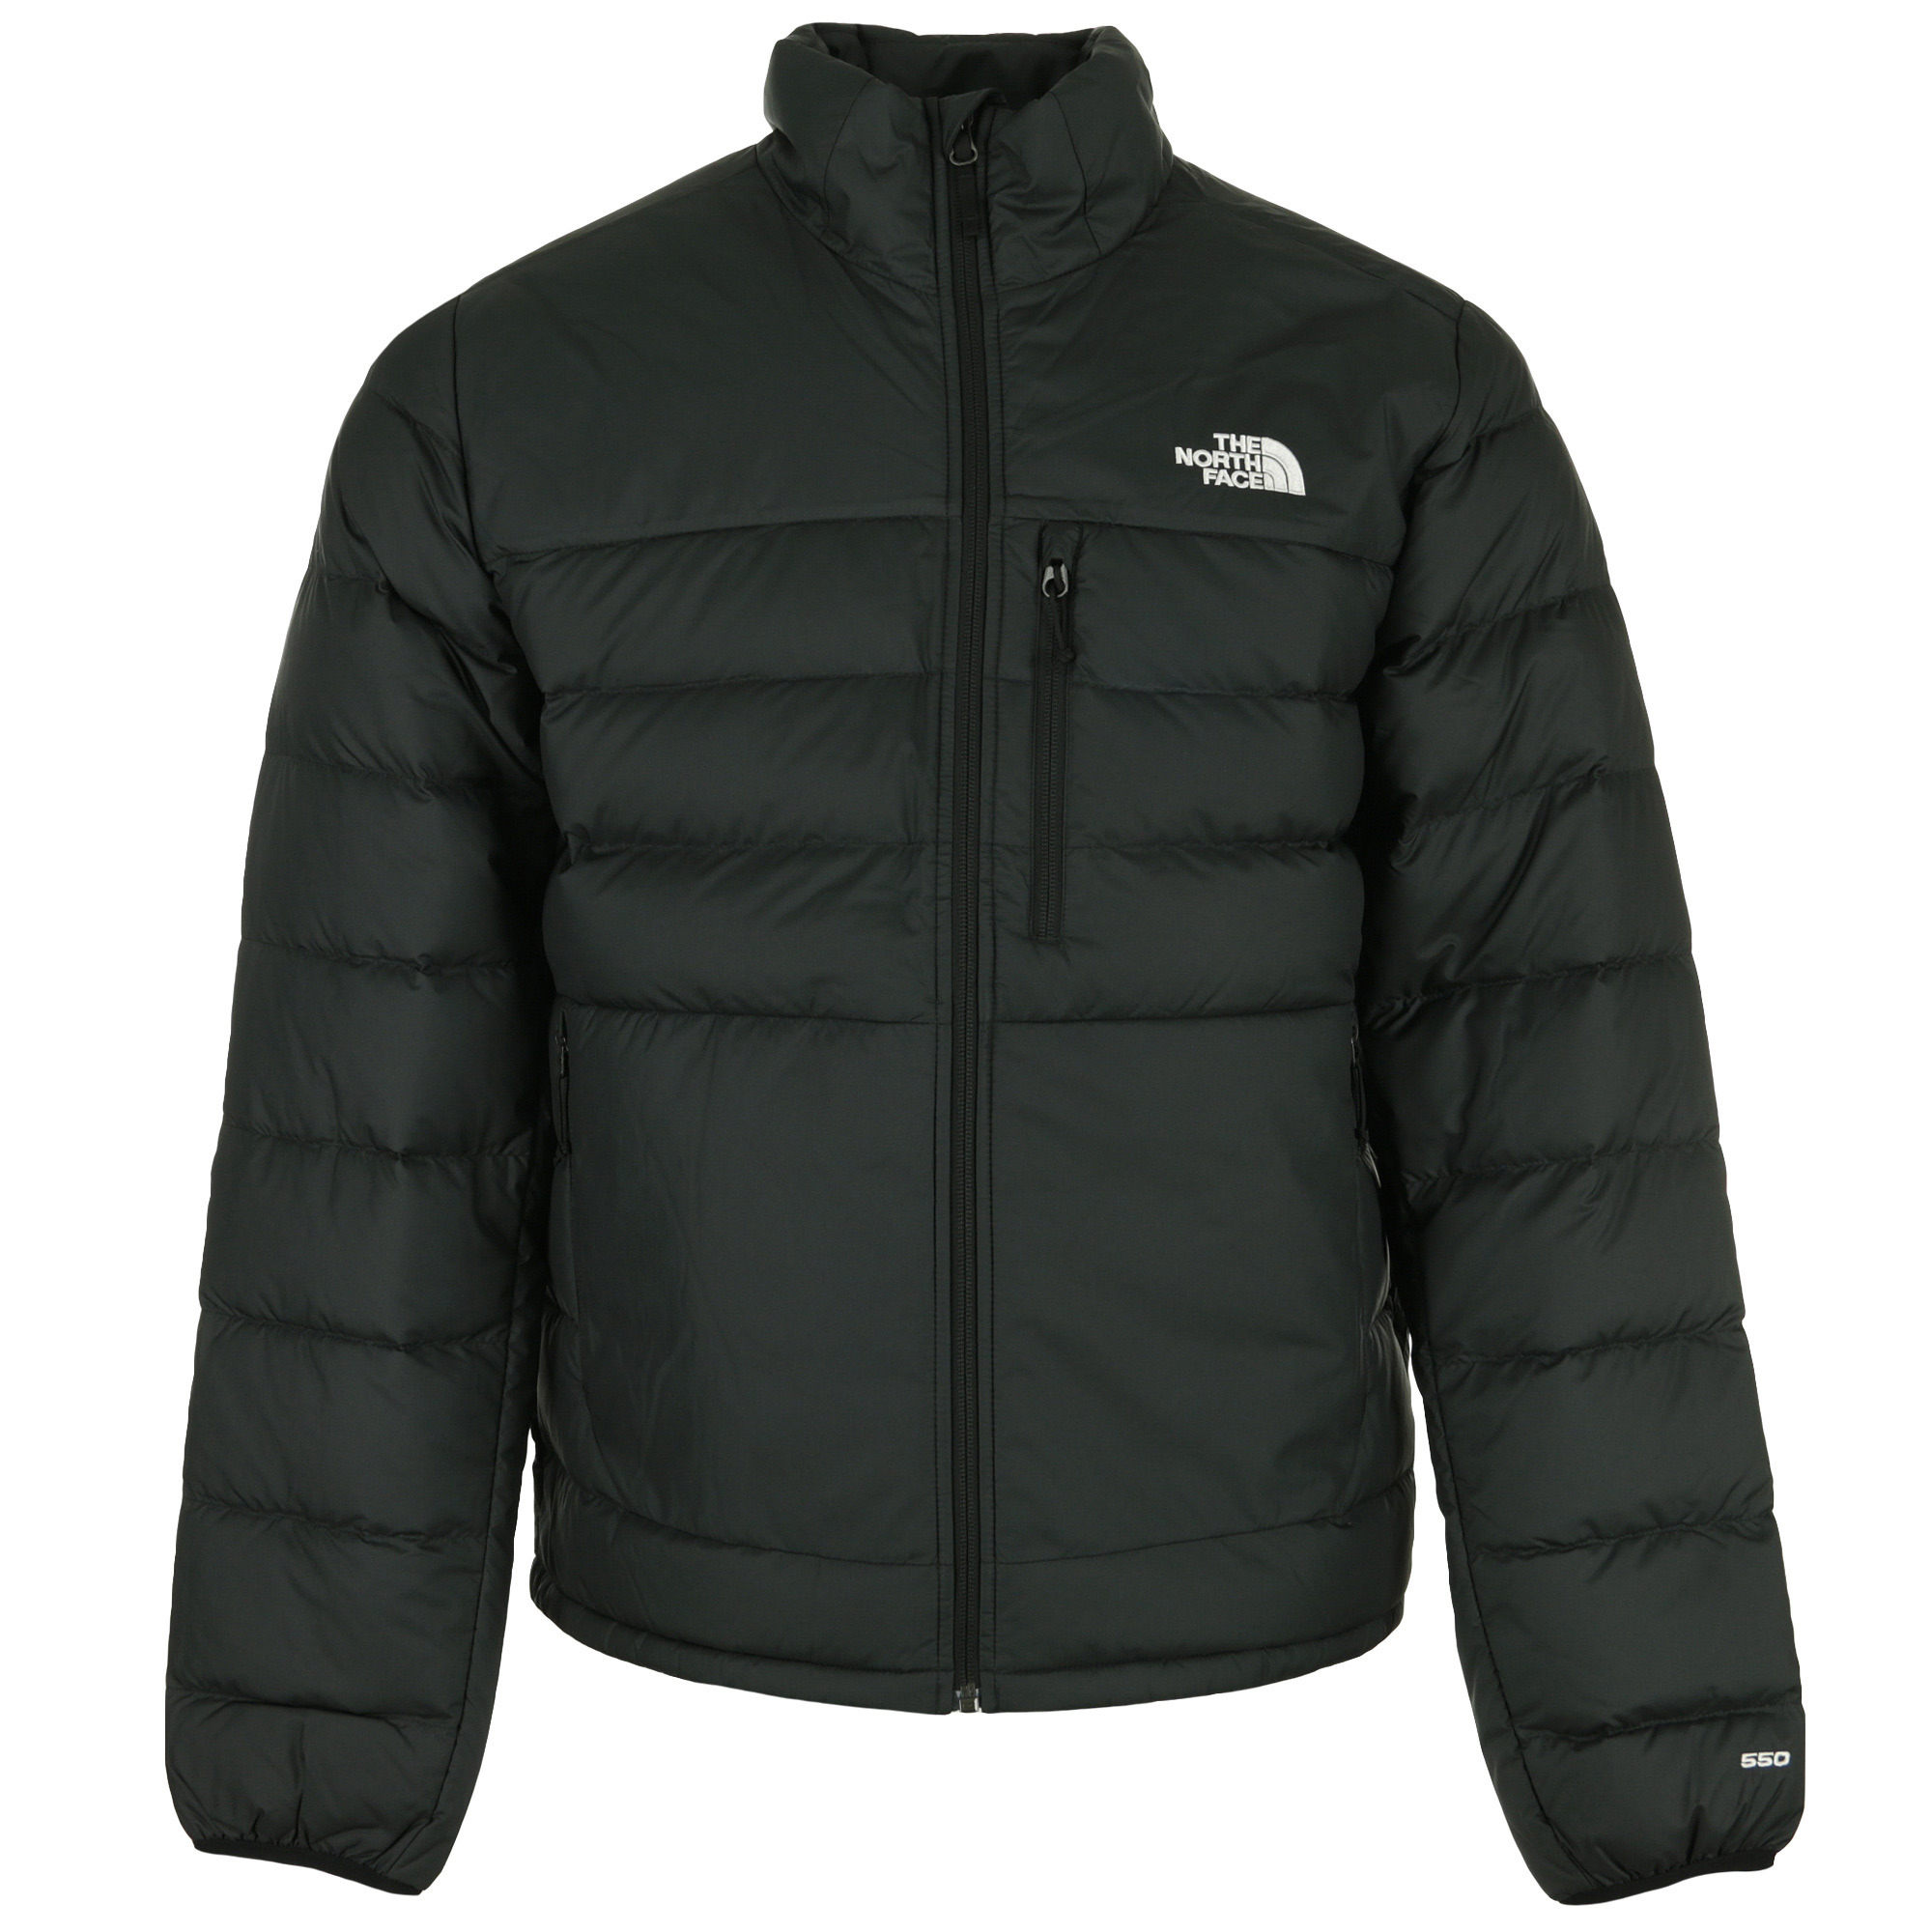 The North Face "Aconcagua 2 Jacket"